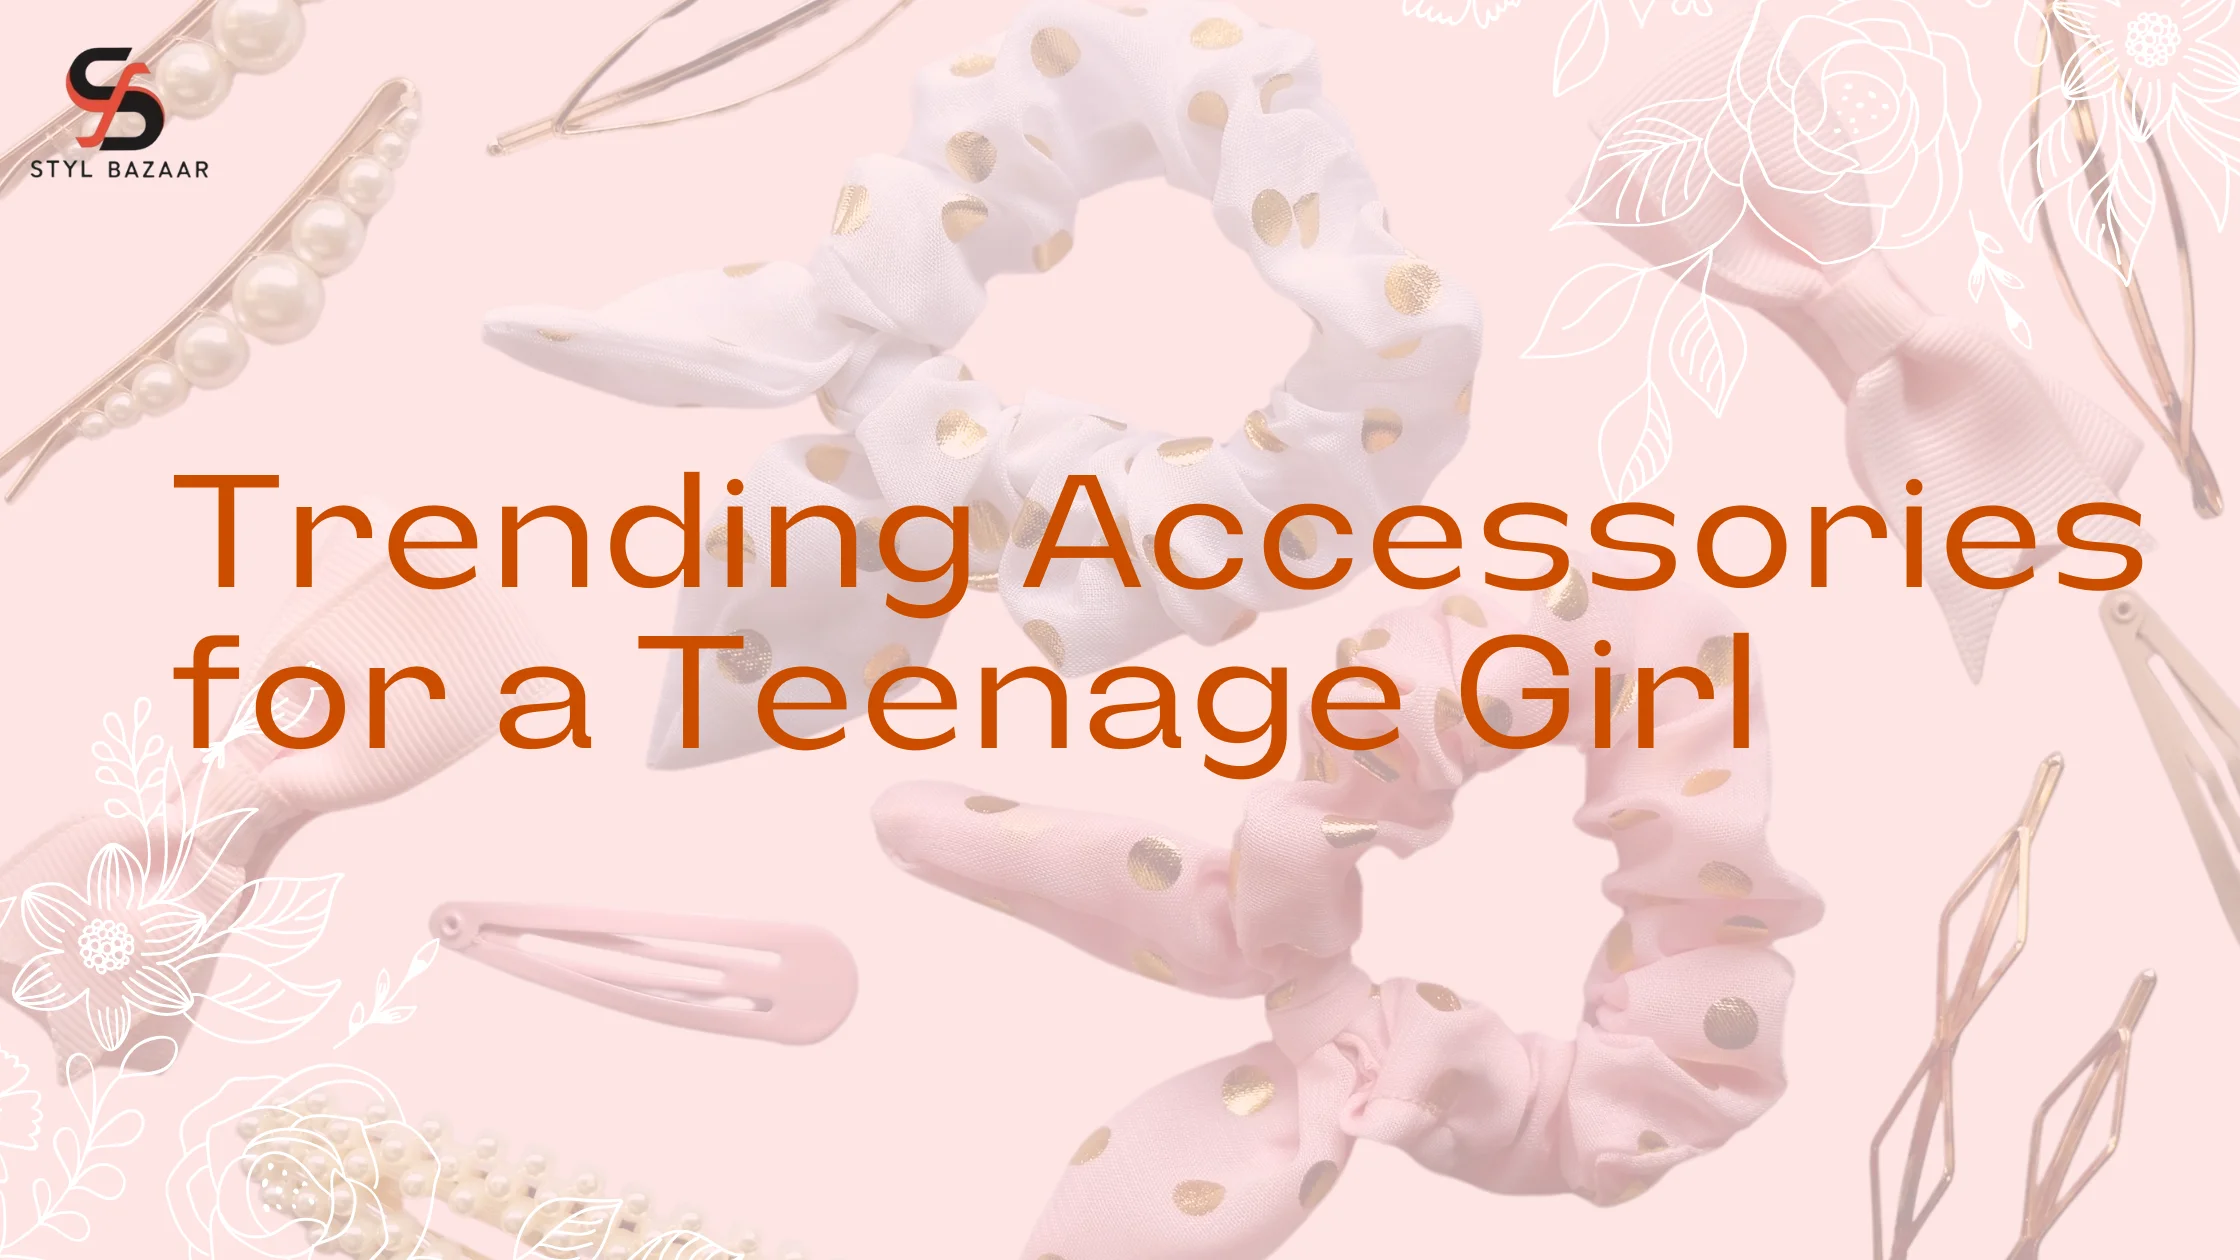 Trending Accessories for a Teenage Girl